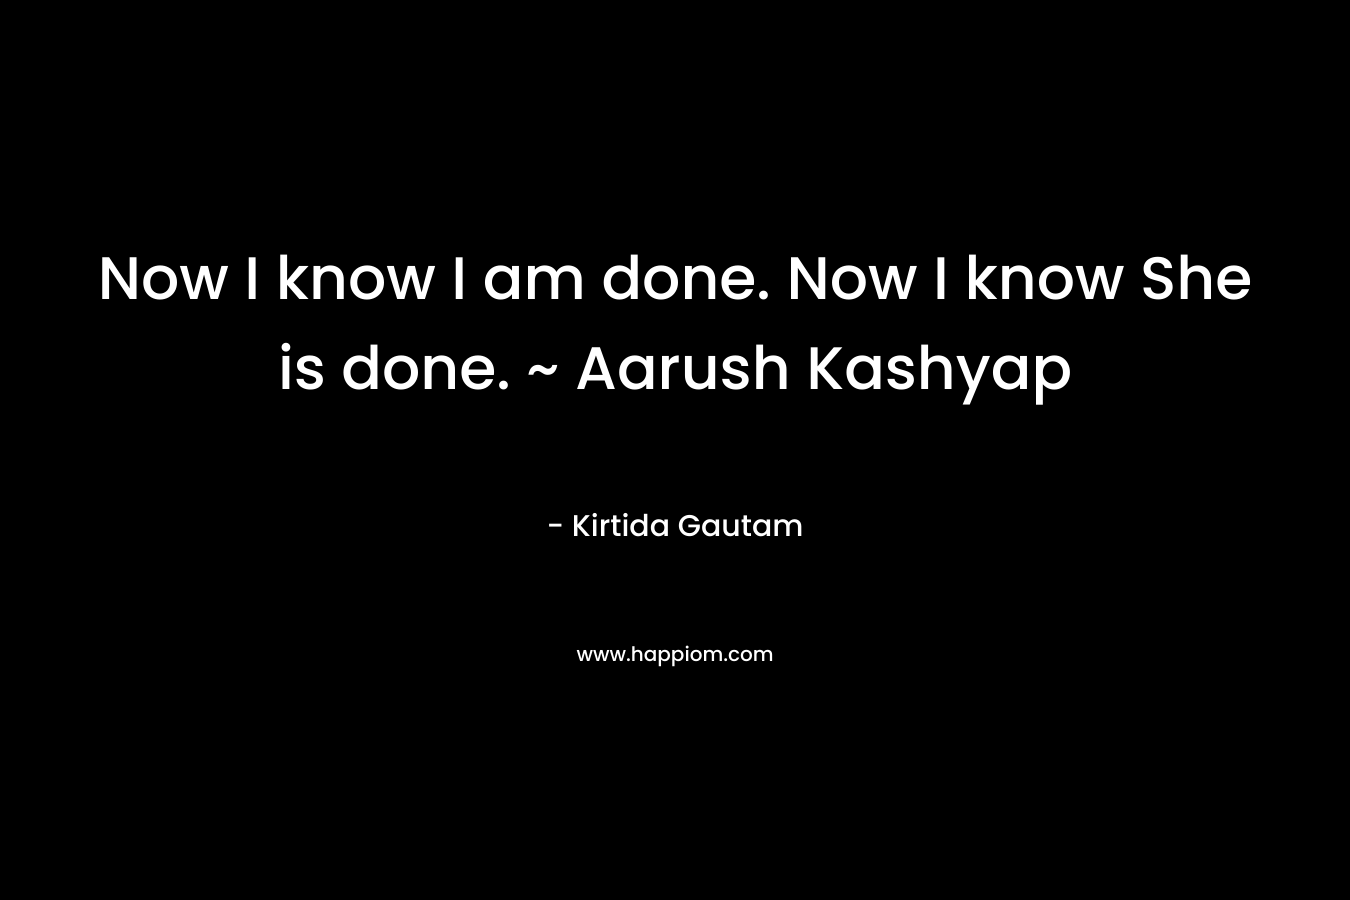 Now I know I am done. Now I know She is done. ~ Aarush Kashyap